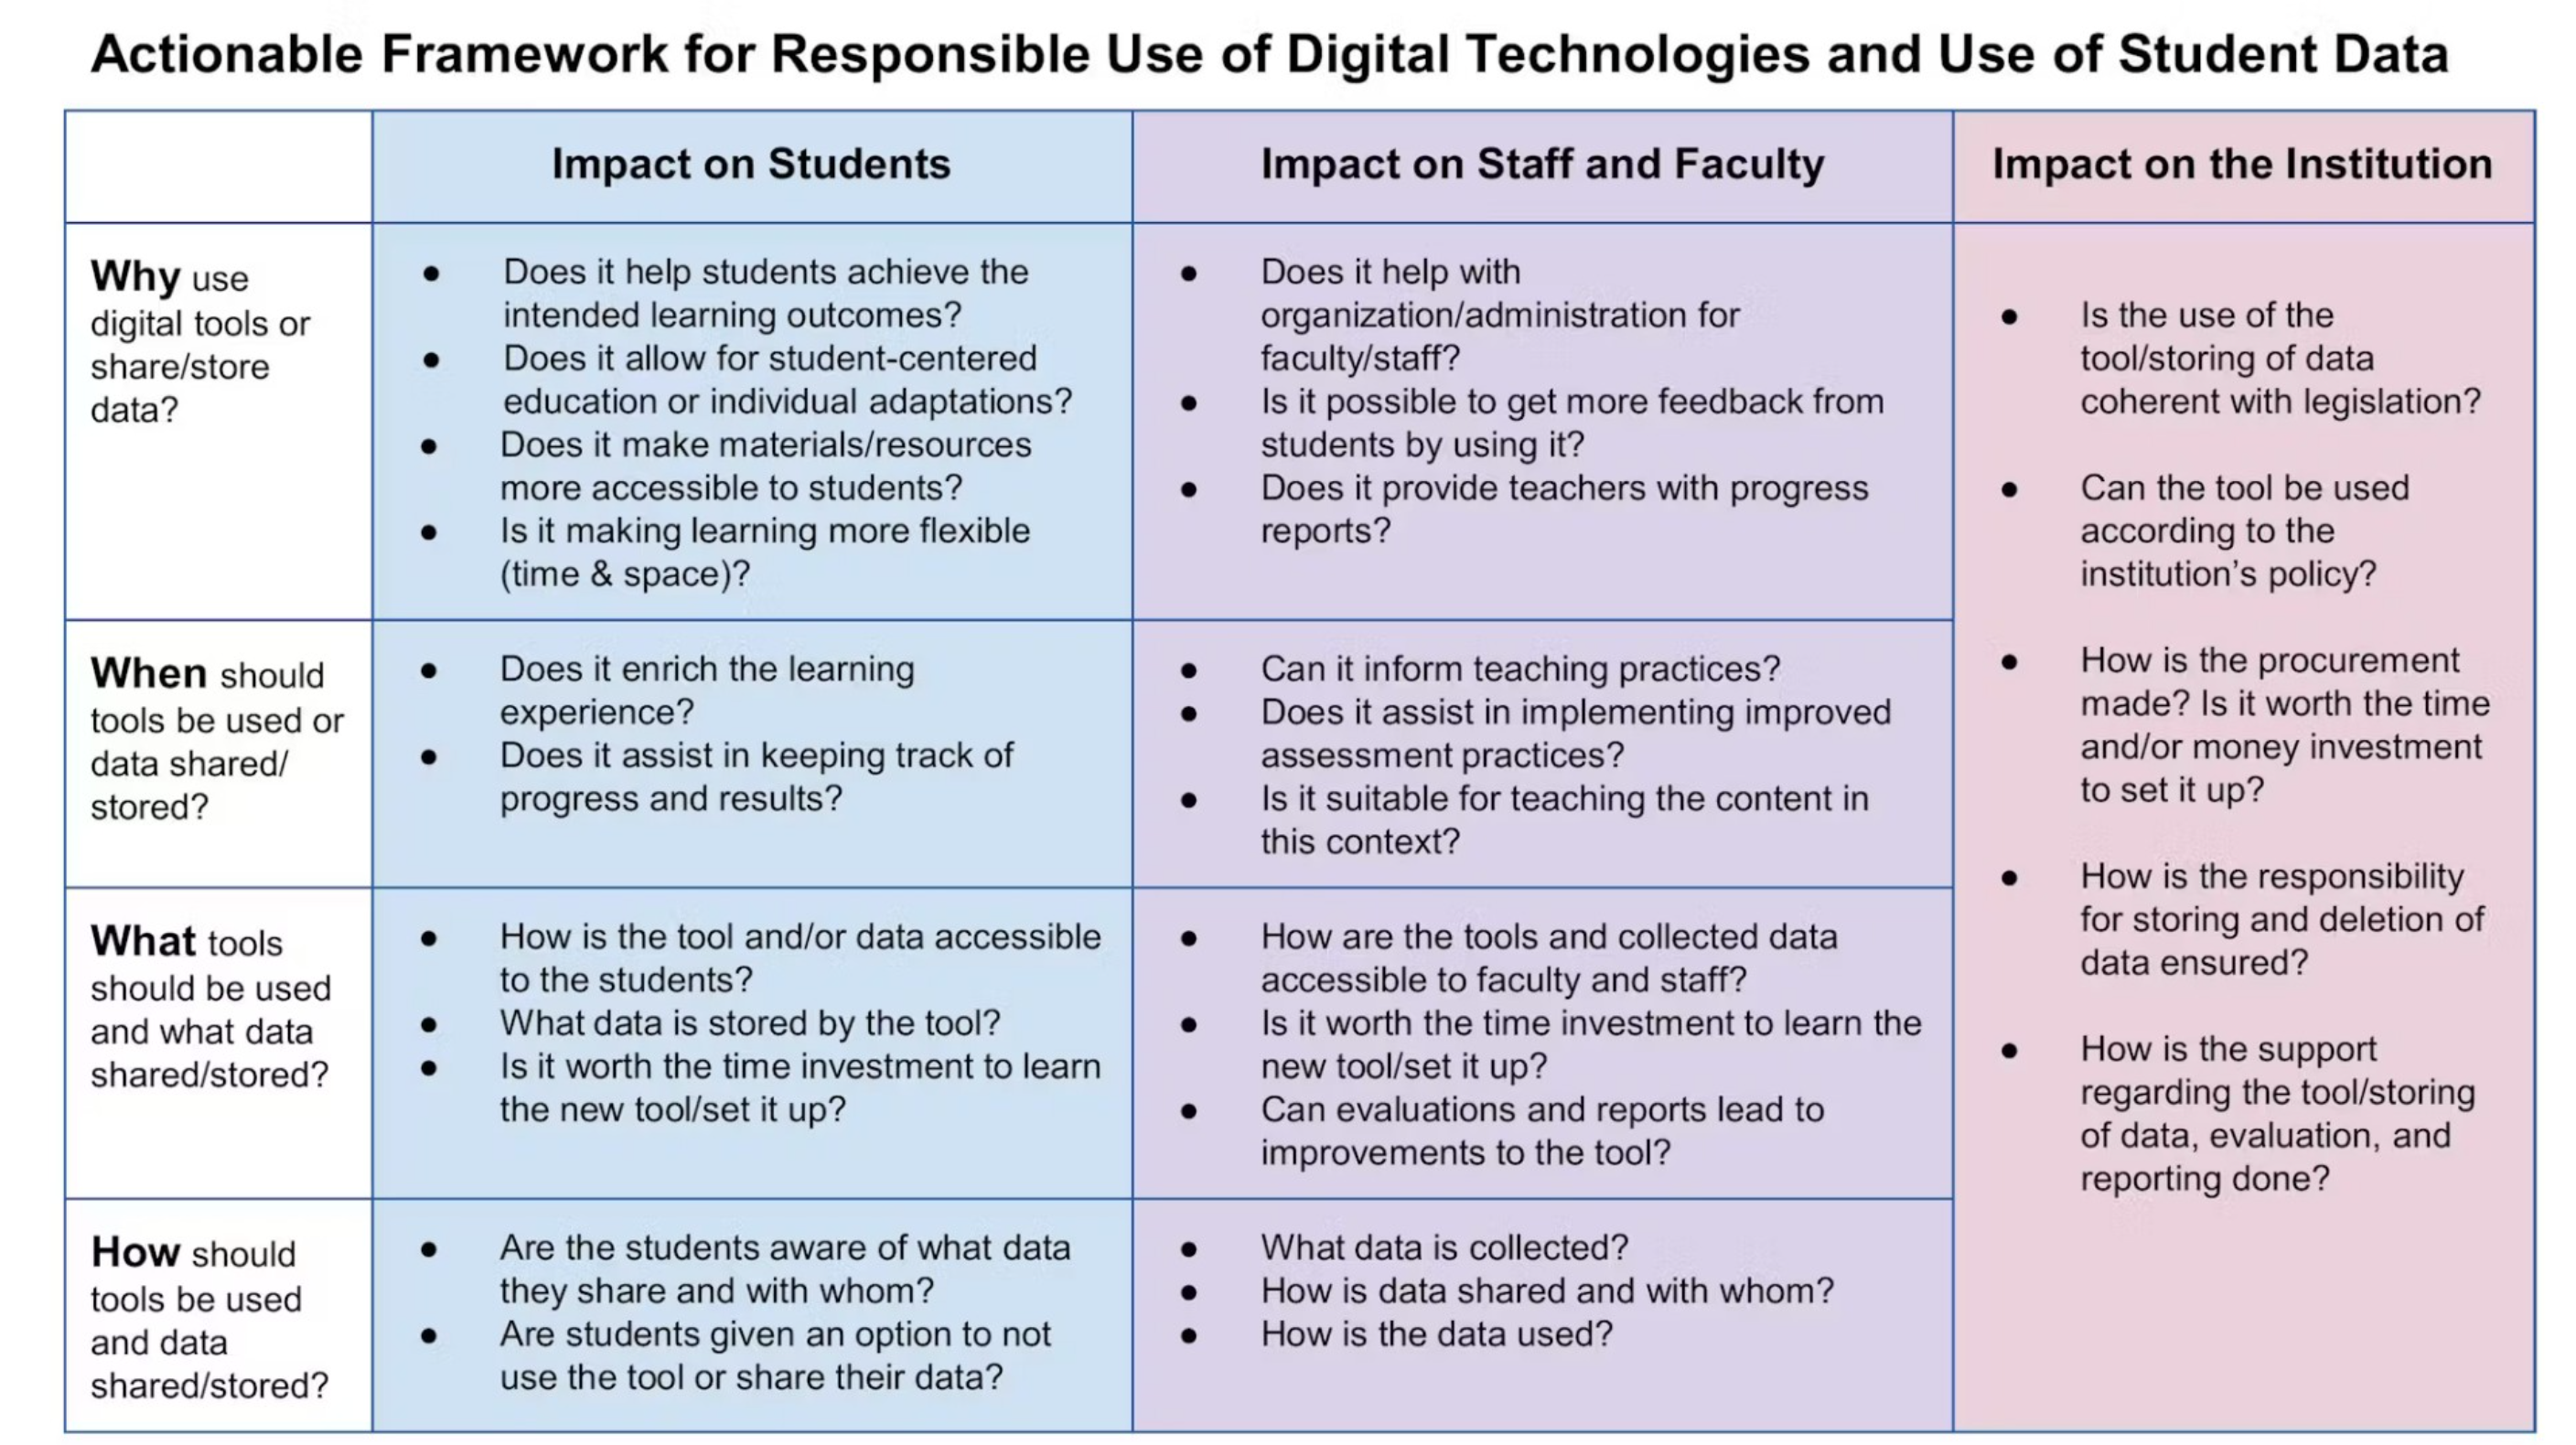 Actionable framework for the responsible use of digital technologies and digital (learner) data